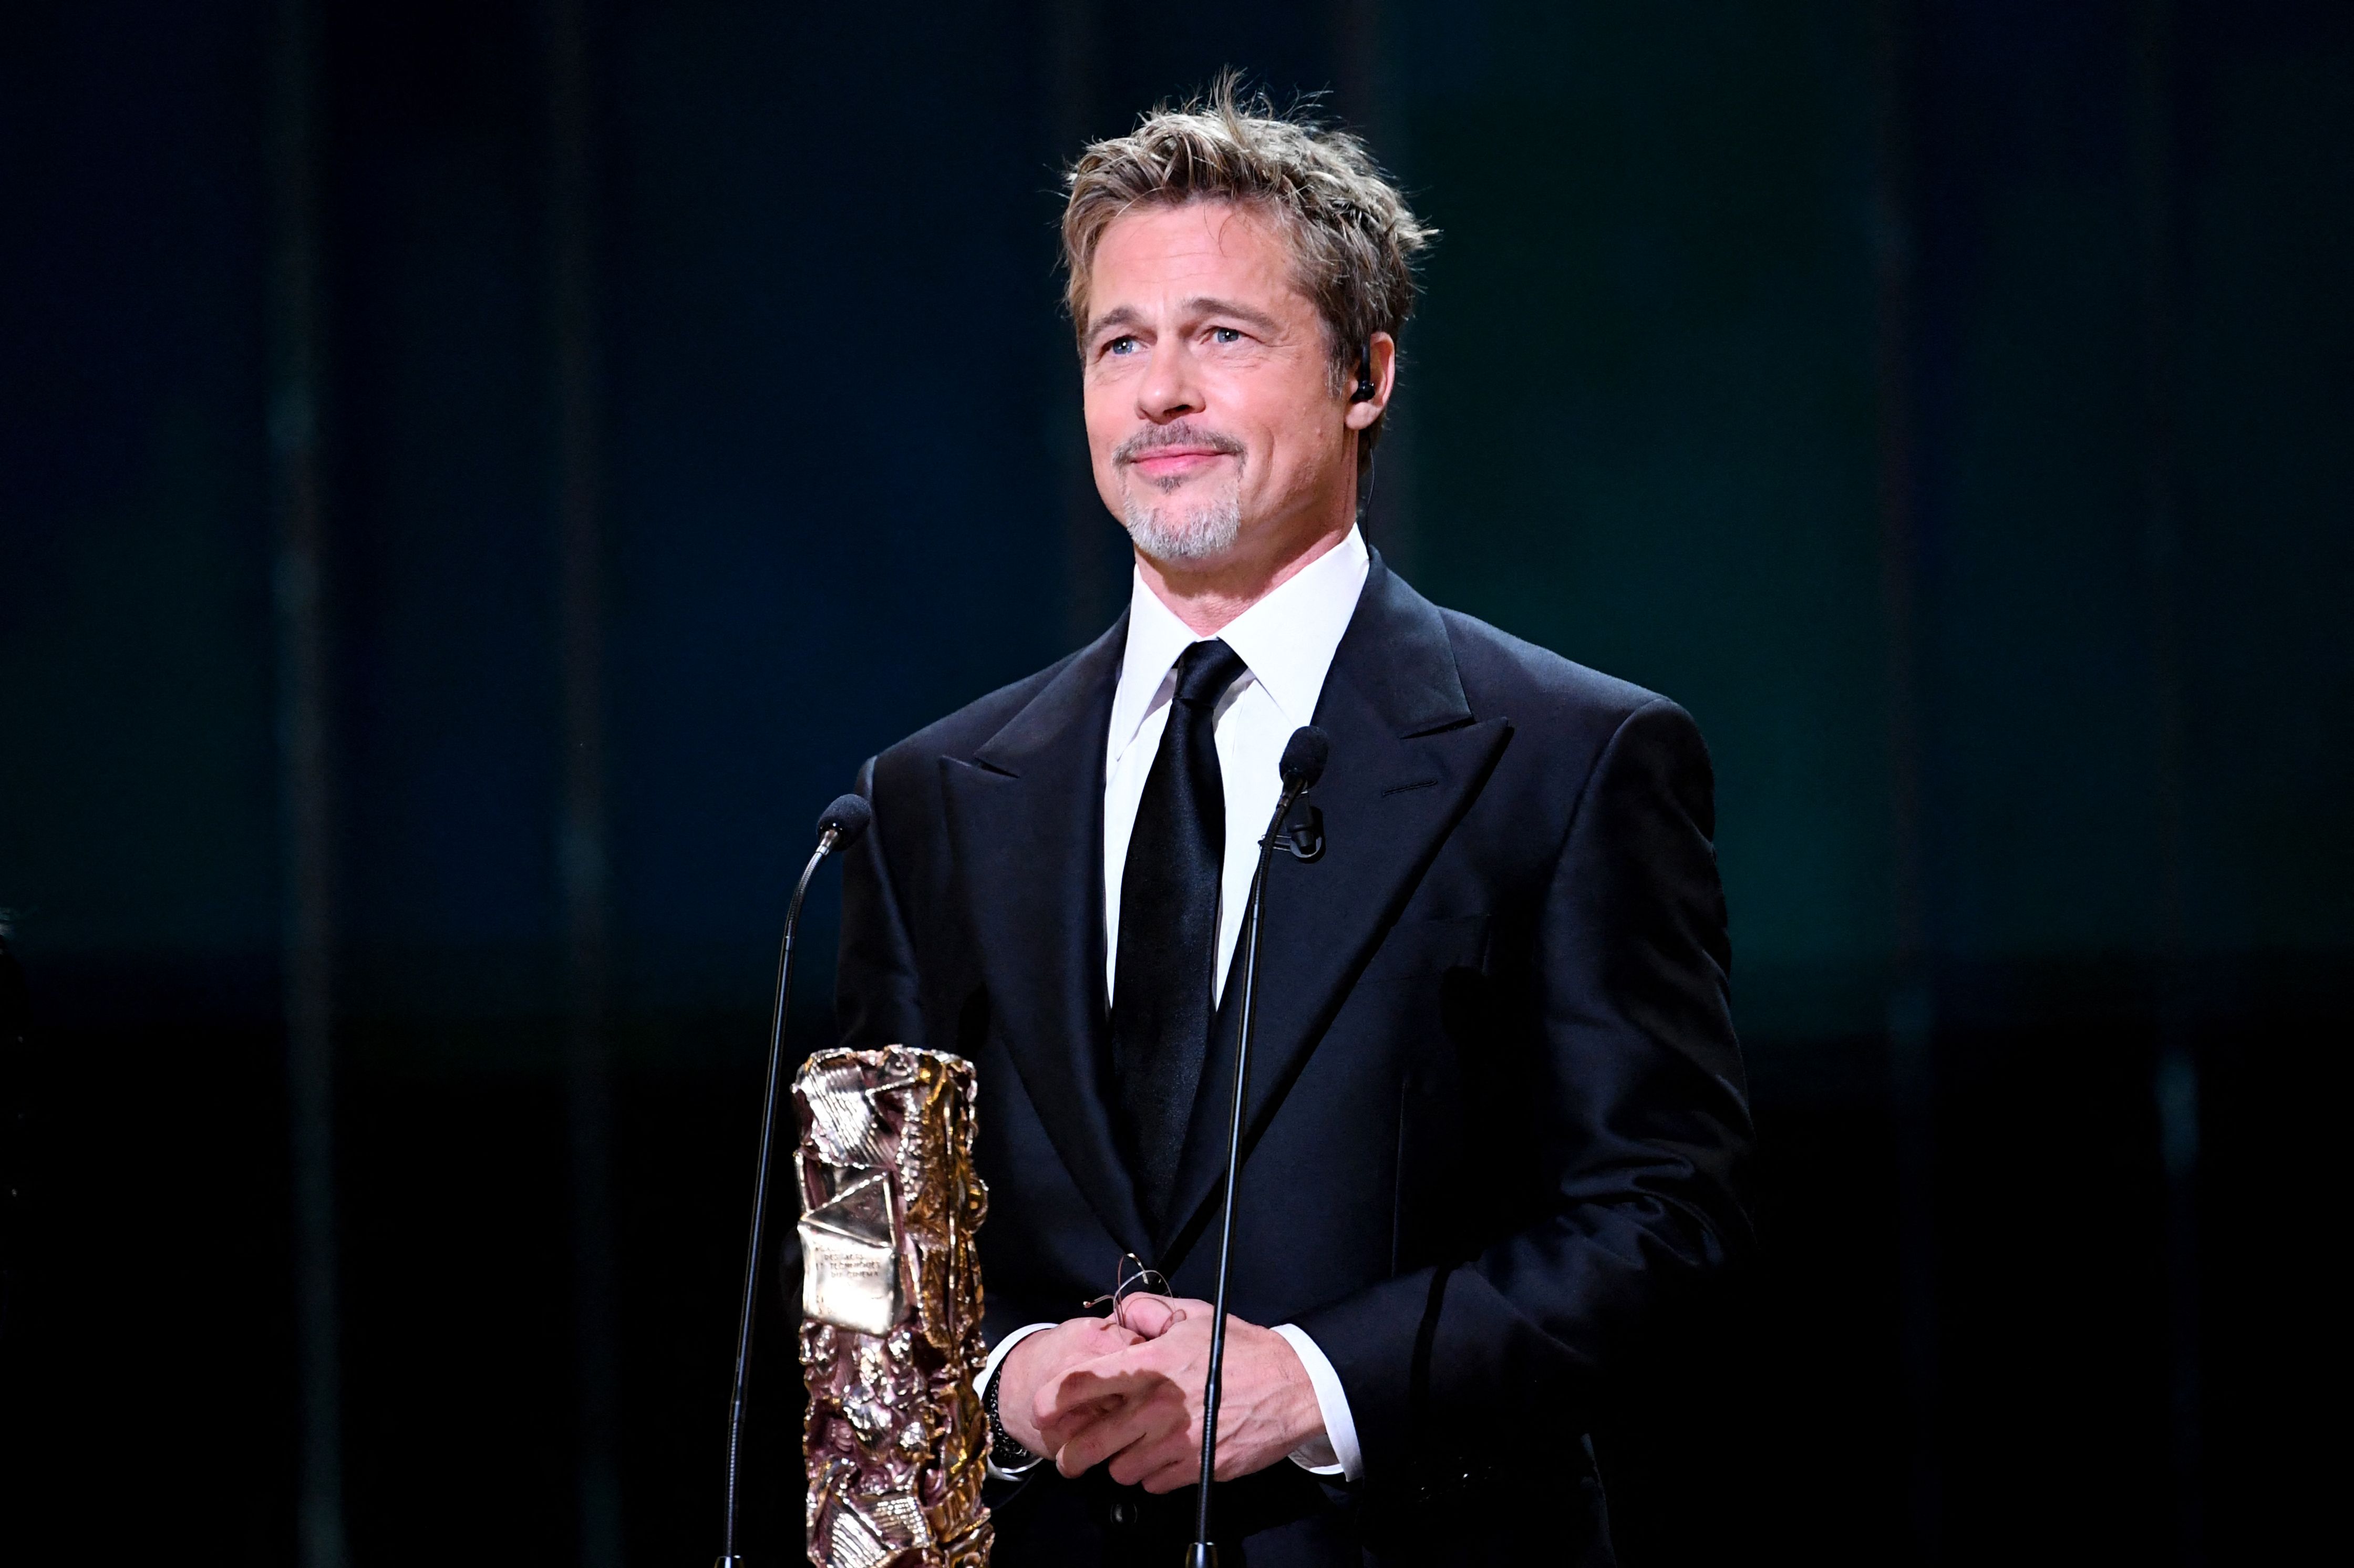 Brad Pitt speaks during the 48th edition of the Cesar Film Awards ceremony at the Olympia venue on February 24, 2023 in Paris. | Source: Getty Images